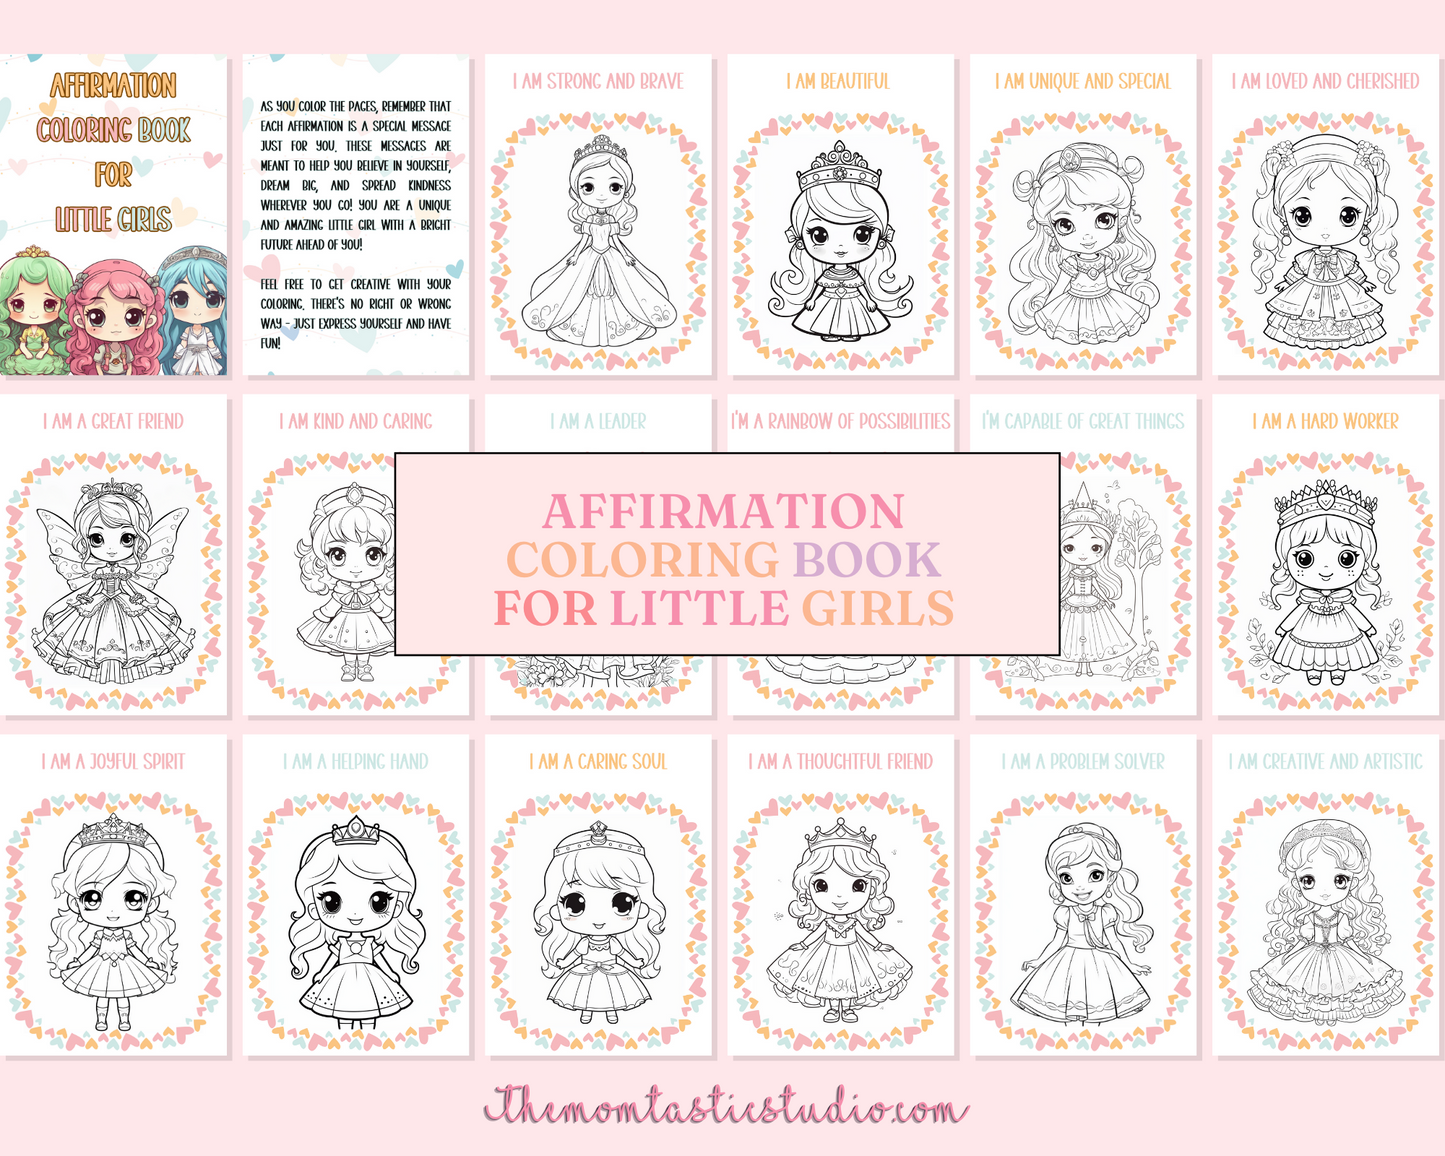 Affirmation Coloring Book for Little Girls – Digital Template – Empowering and Fun